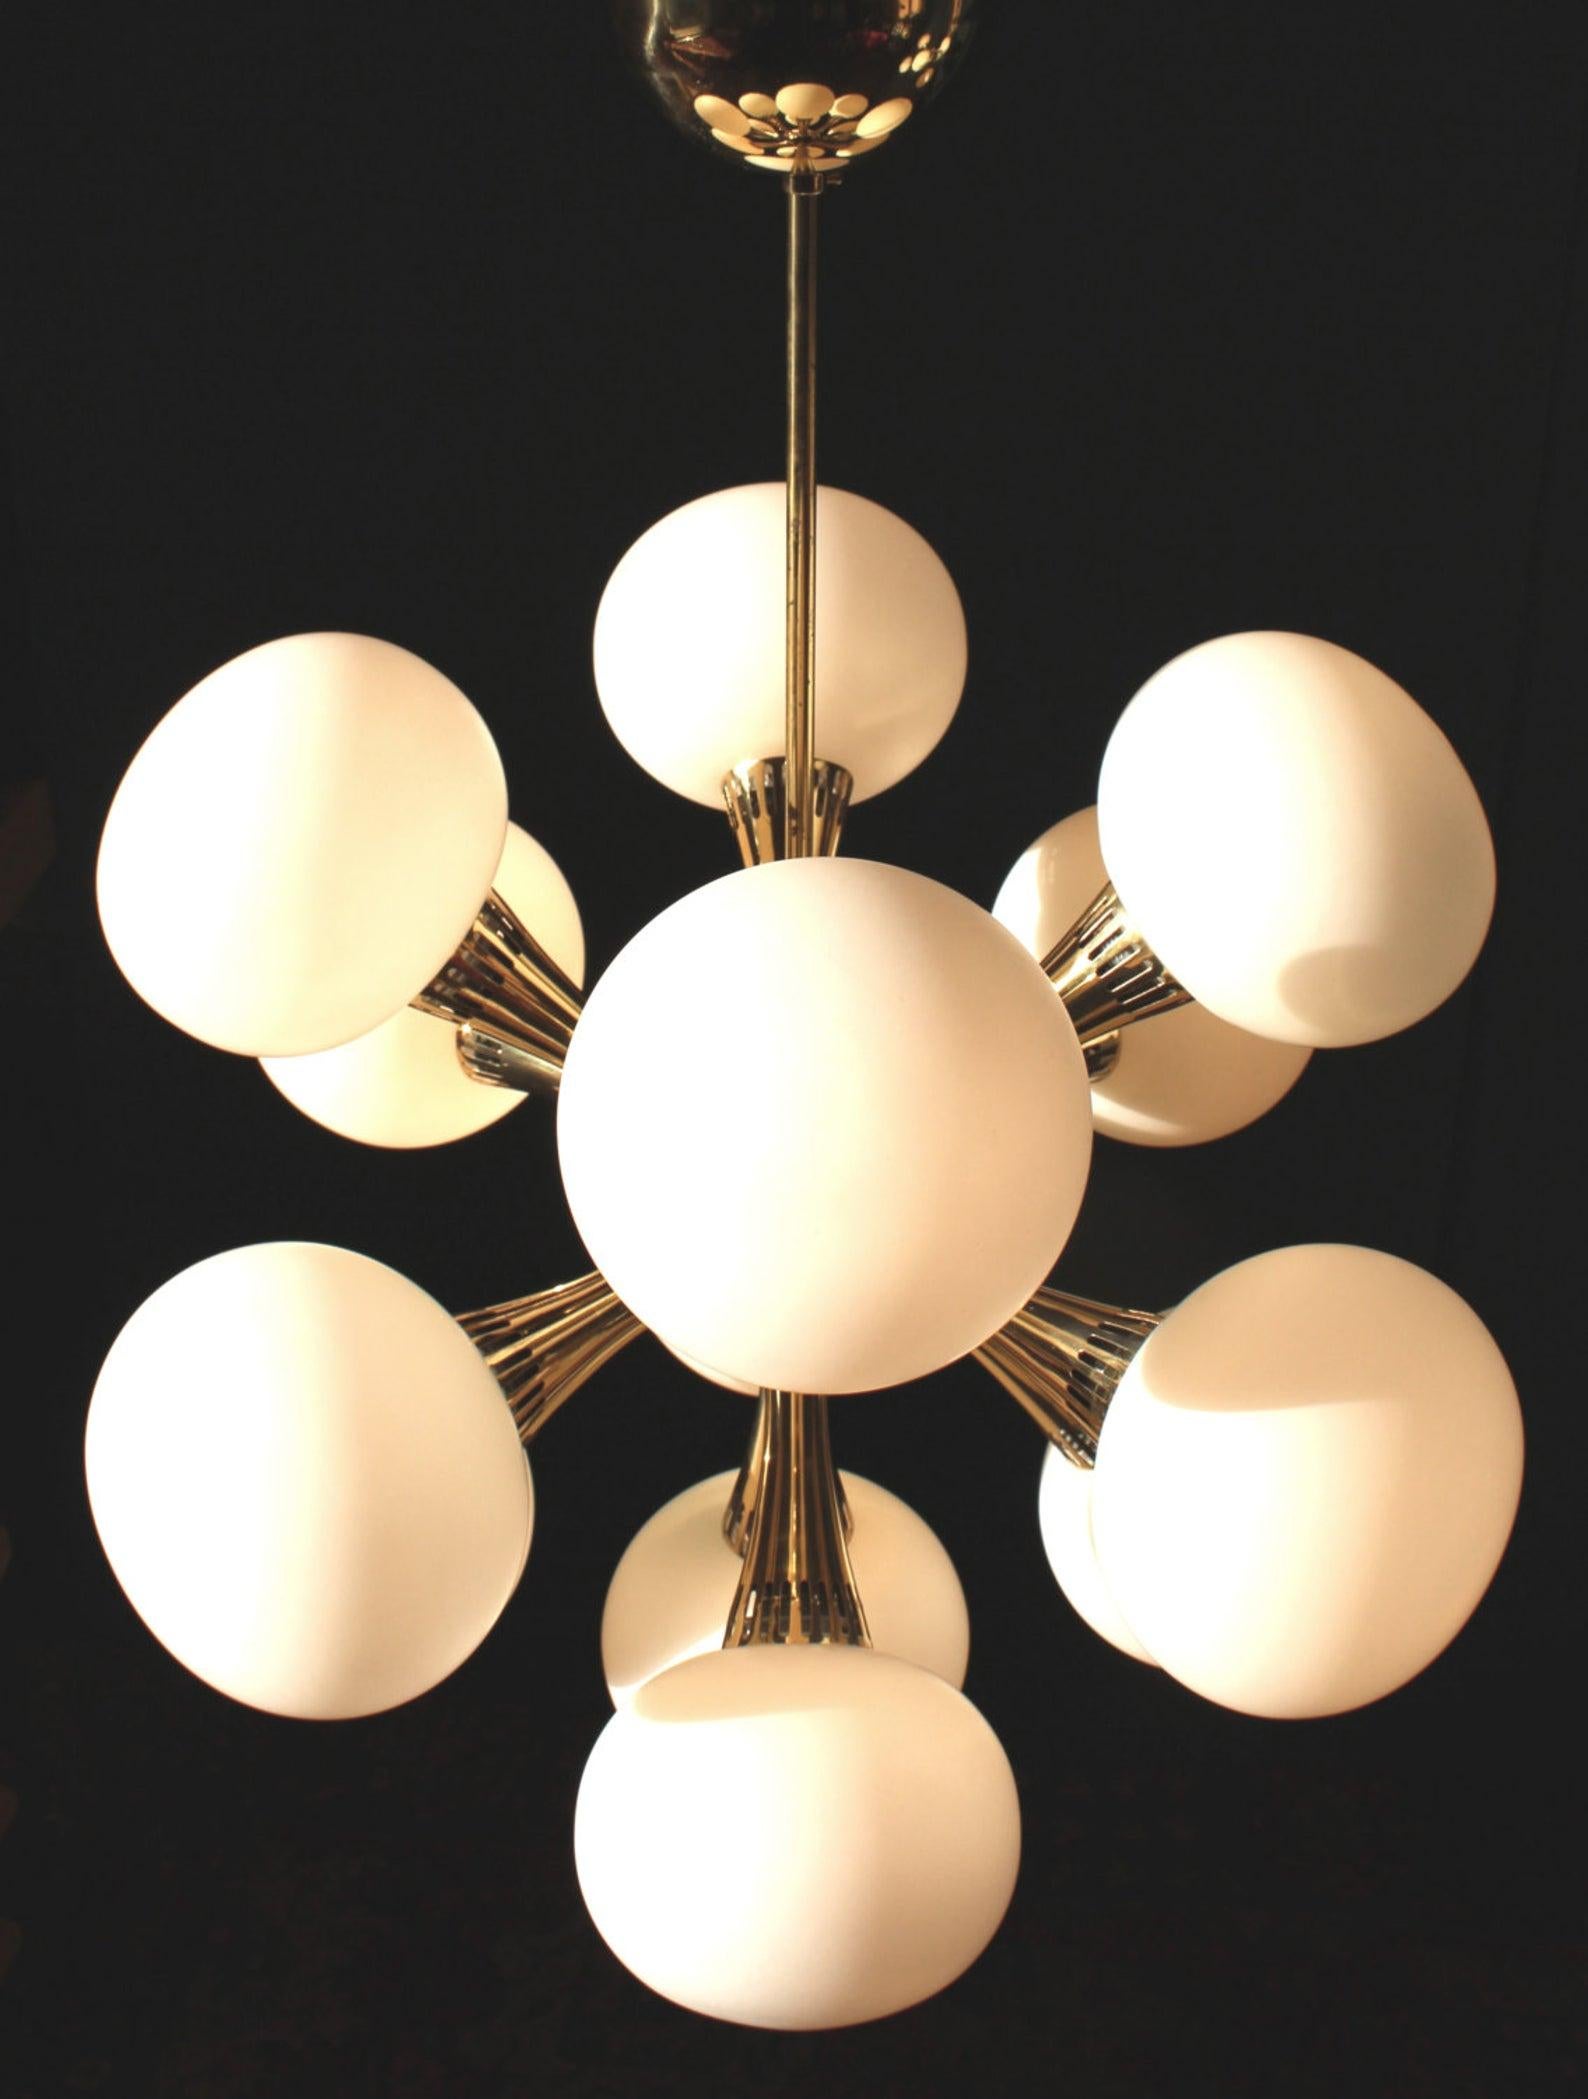 Organic sputnik chandelier Milano 1950s type with 13 lights (E14)
Brass and elliptical opal glass globes

This sputnik chandelier is a timeless and elegant masterpiece of midcentury Italian Furniture Design, The light sculpture impresses with clear